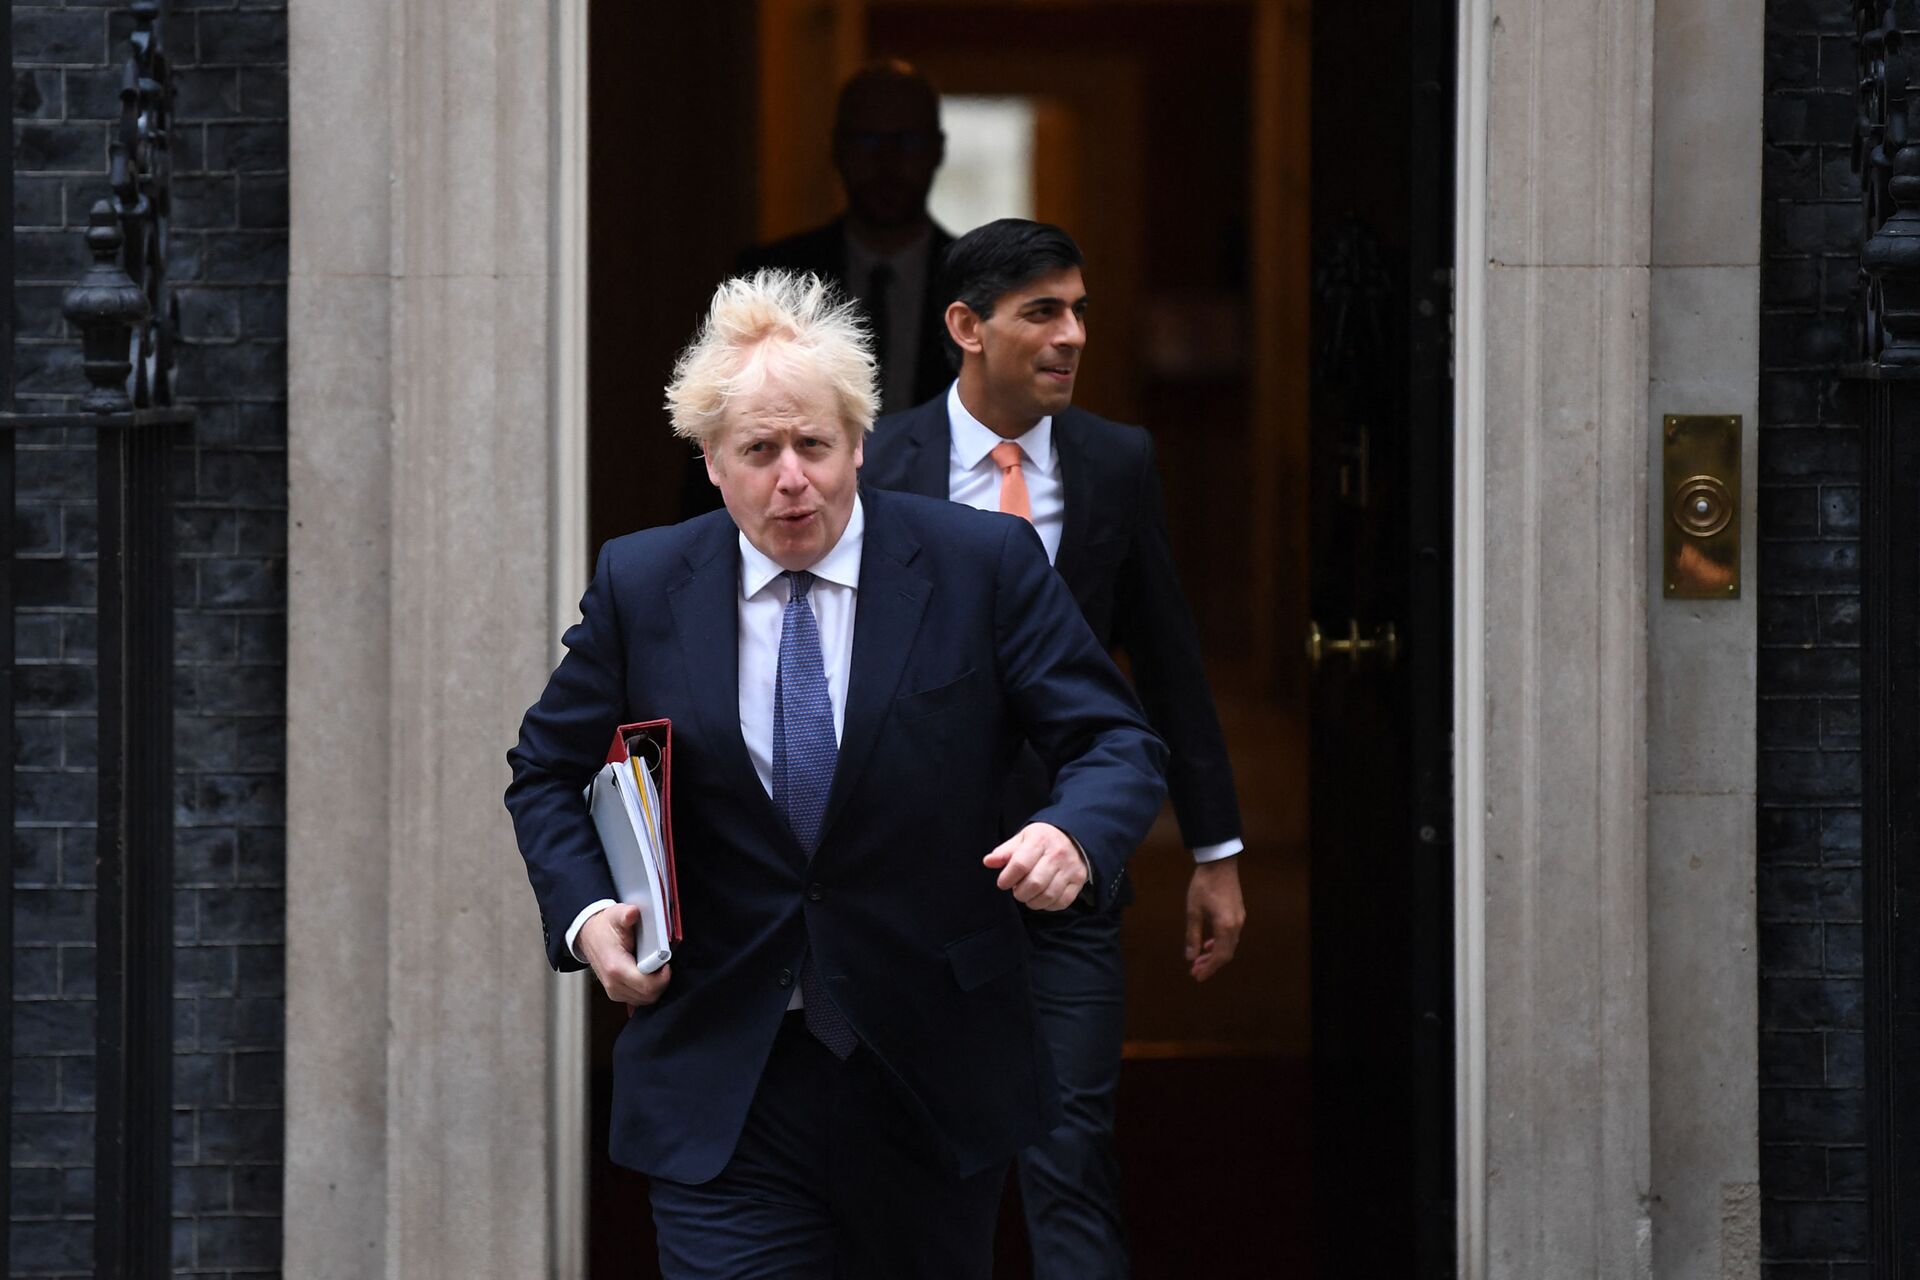 Britain's Prime Minister Boris Johnson (L) and Britain's Chancellor of the Exchequer Rishi Sunak (R) leave 10 Downing Street to attend the weekly cabinet meeting in London on October 13, 2020 held at the Foreign, Commonwealth and Development Office - Sputnik International, 1920, 07.09.2021